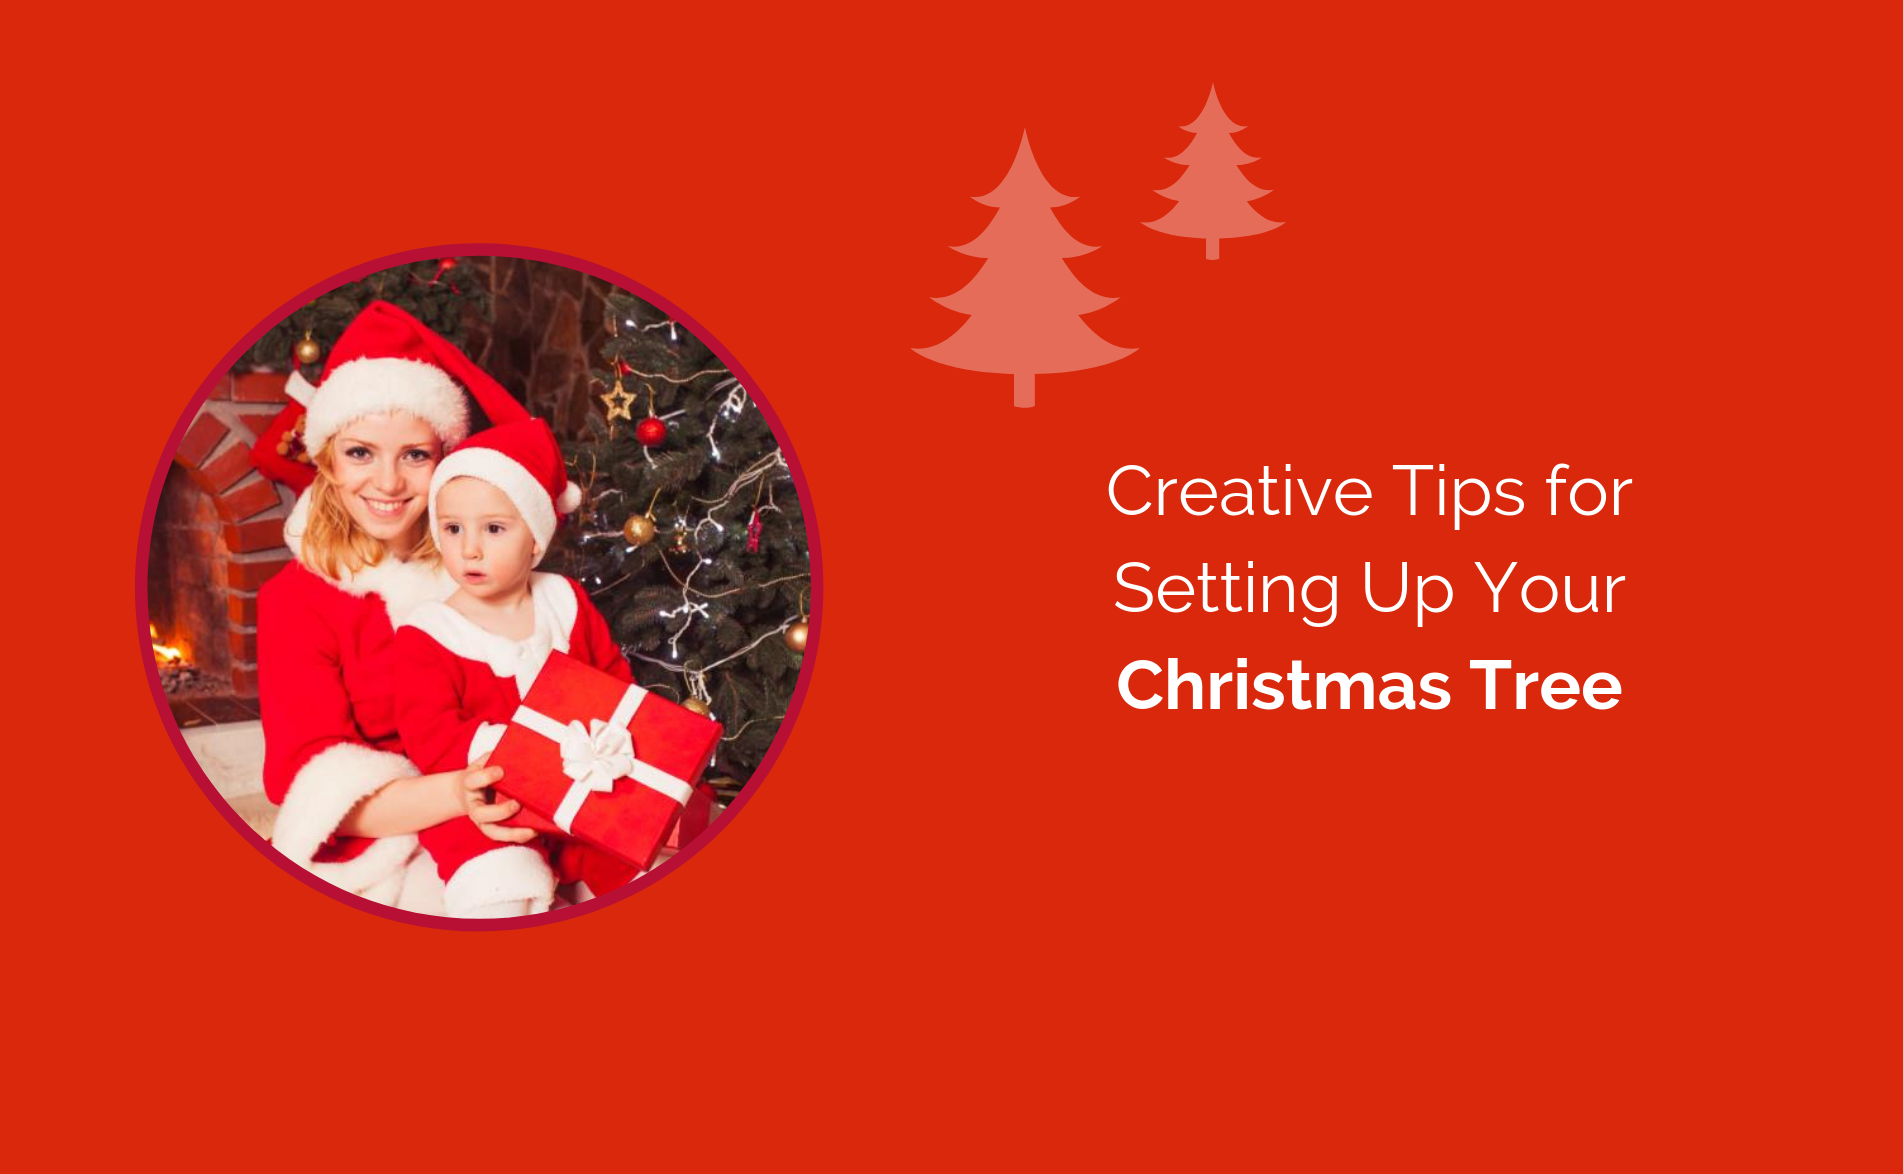 10 Creative Tips for Setting Up Your Christmas Tree